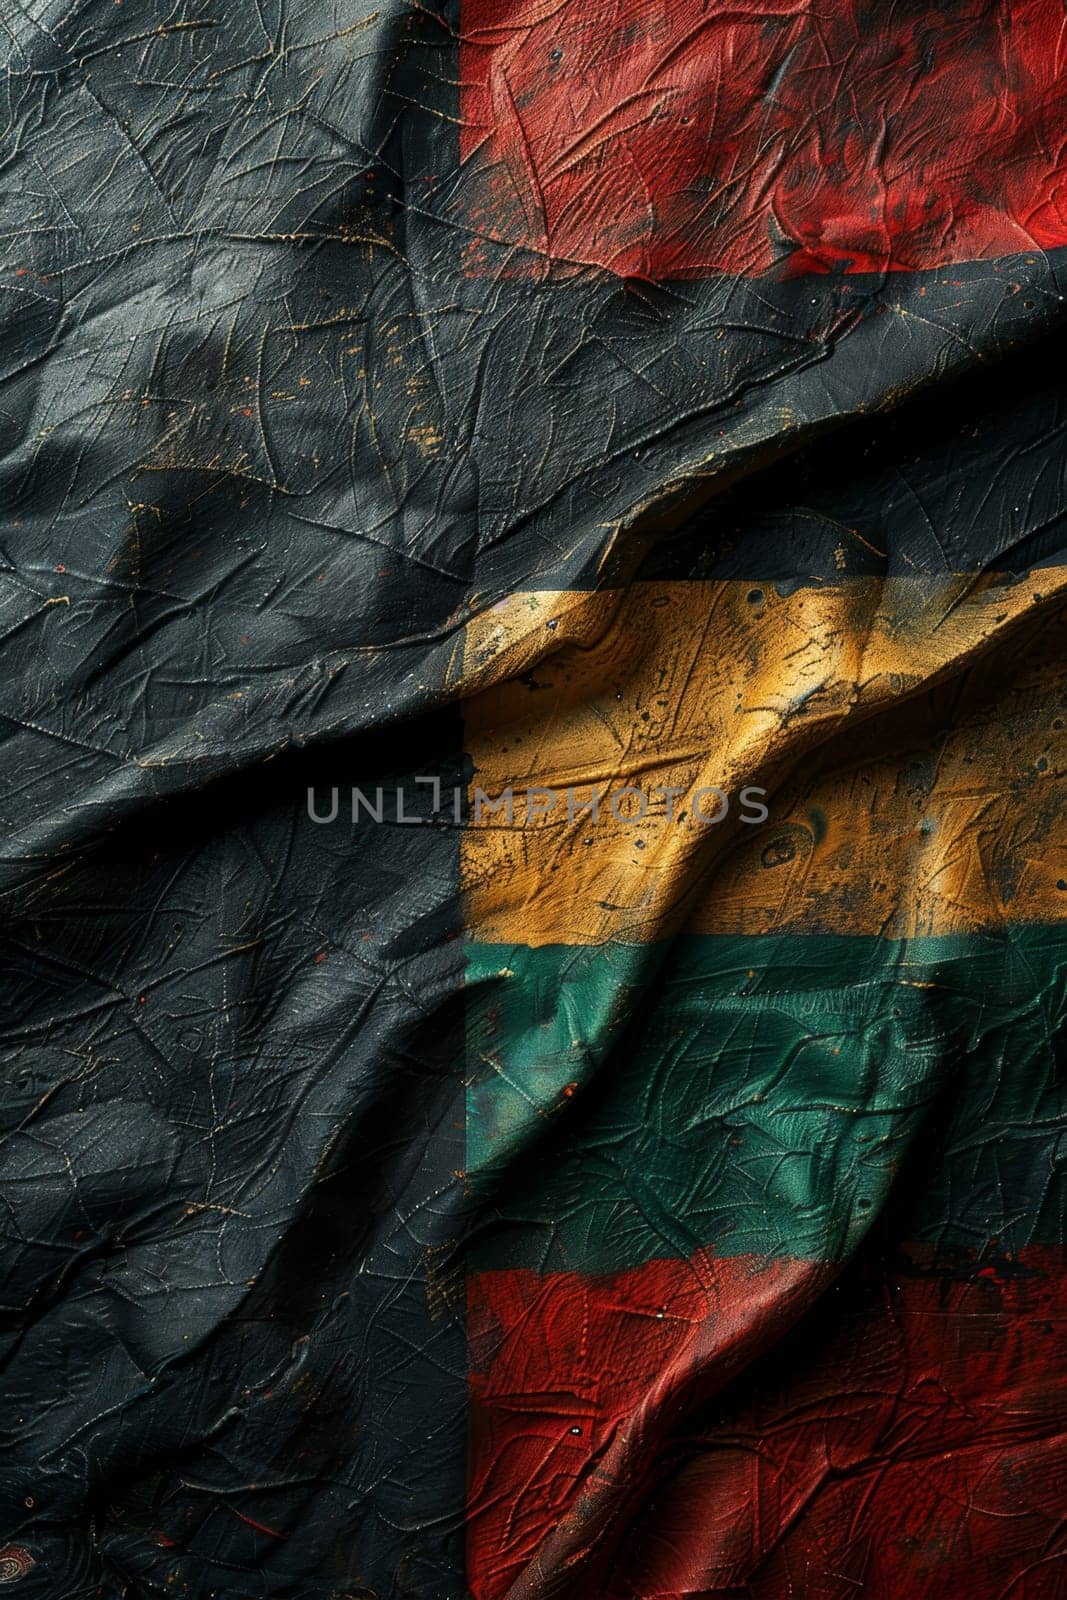 Background in African colors, yellow, green, red and black . Background symbolizing the abolition of slavery in the USA.